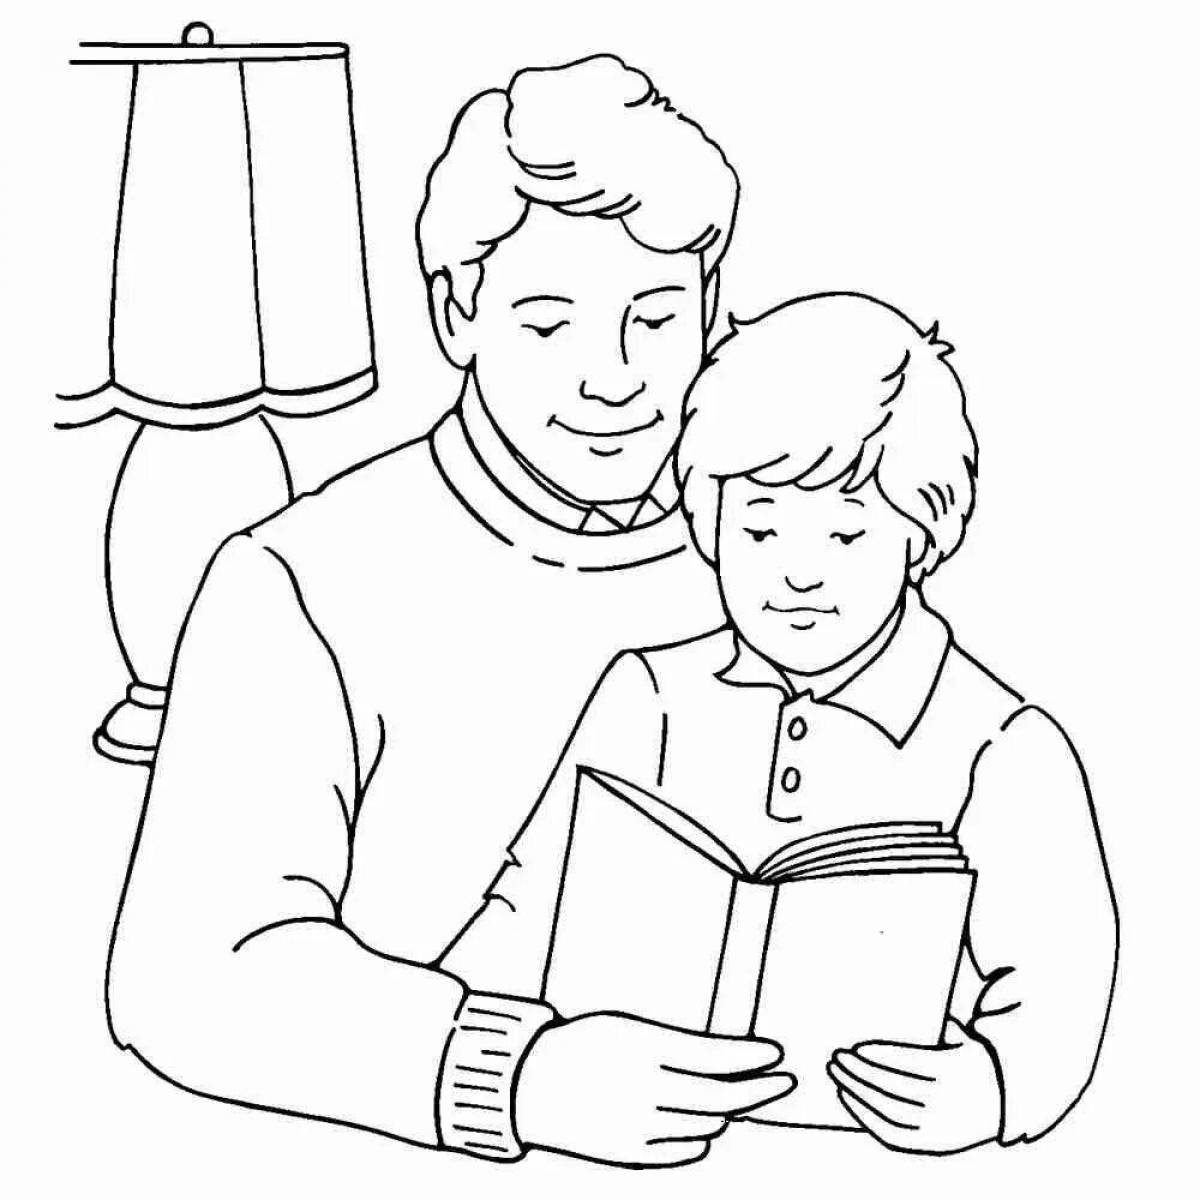 Son and Dad Inspired Coloring Page